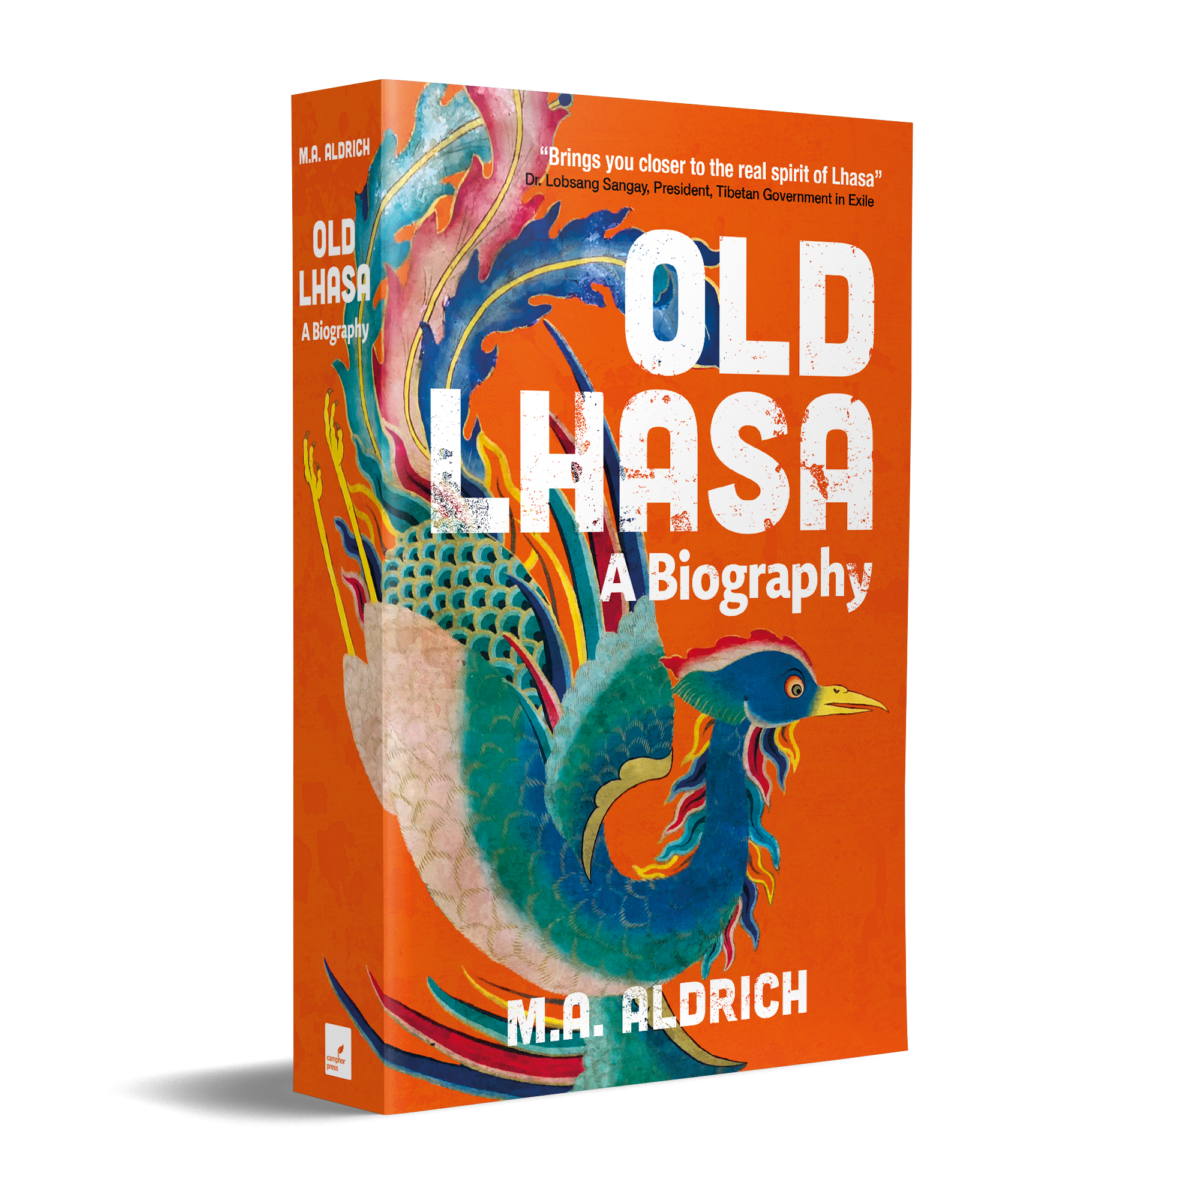 The paperback of Old Lhasa, by M.A. Aldrich